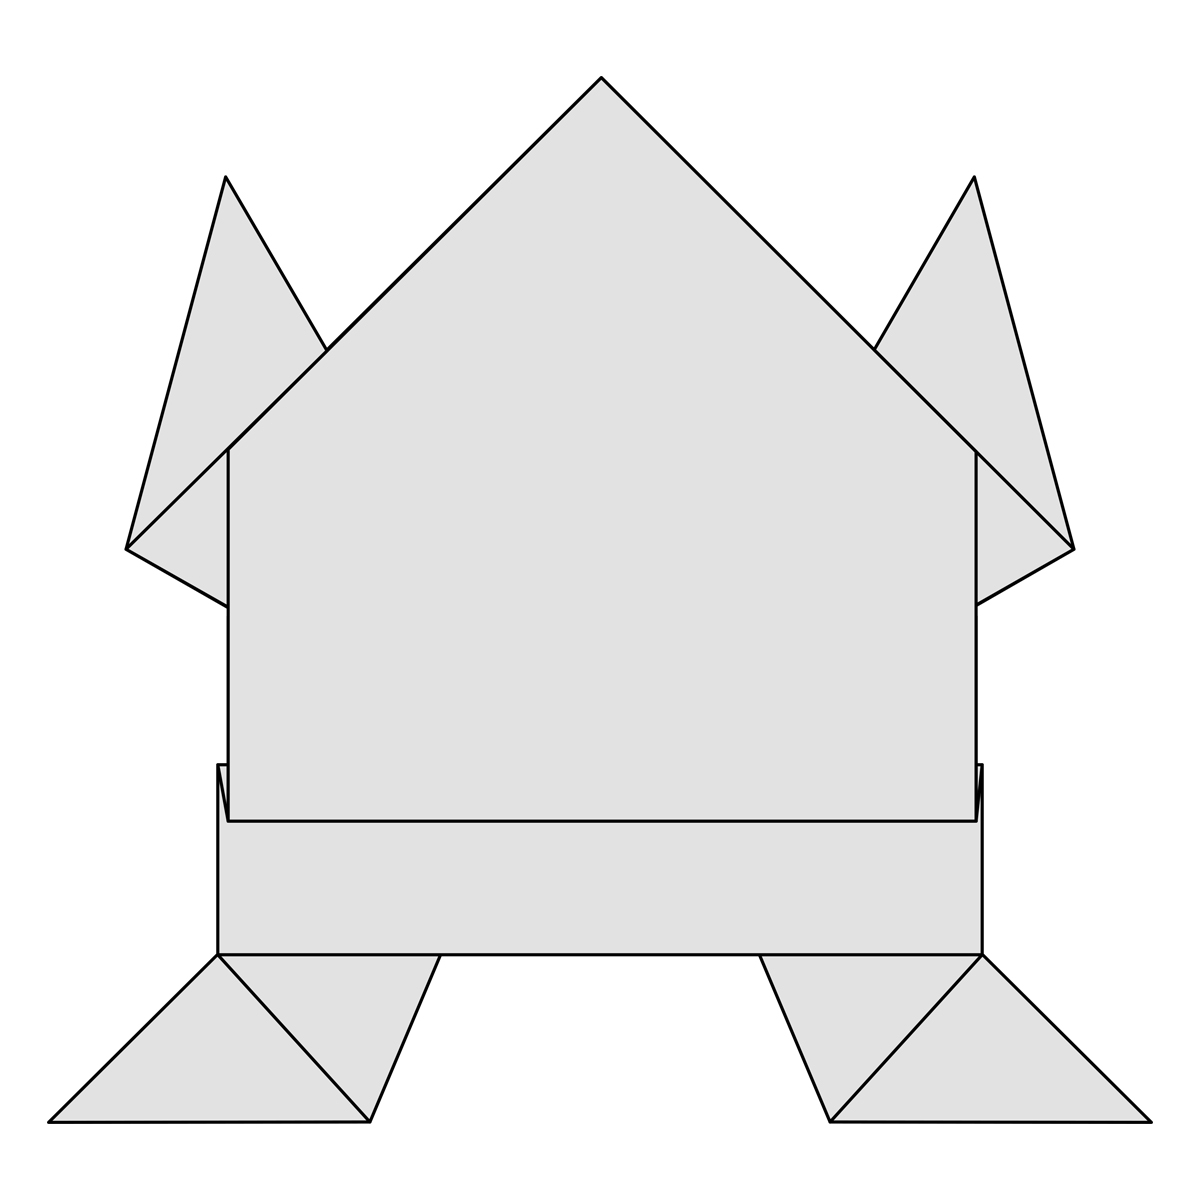 Origami Frog Instructions How To Fold An Easy Origami Jumping Frog Traditional Jumping Frog